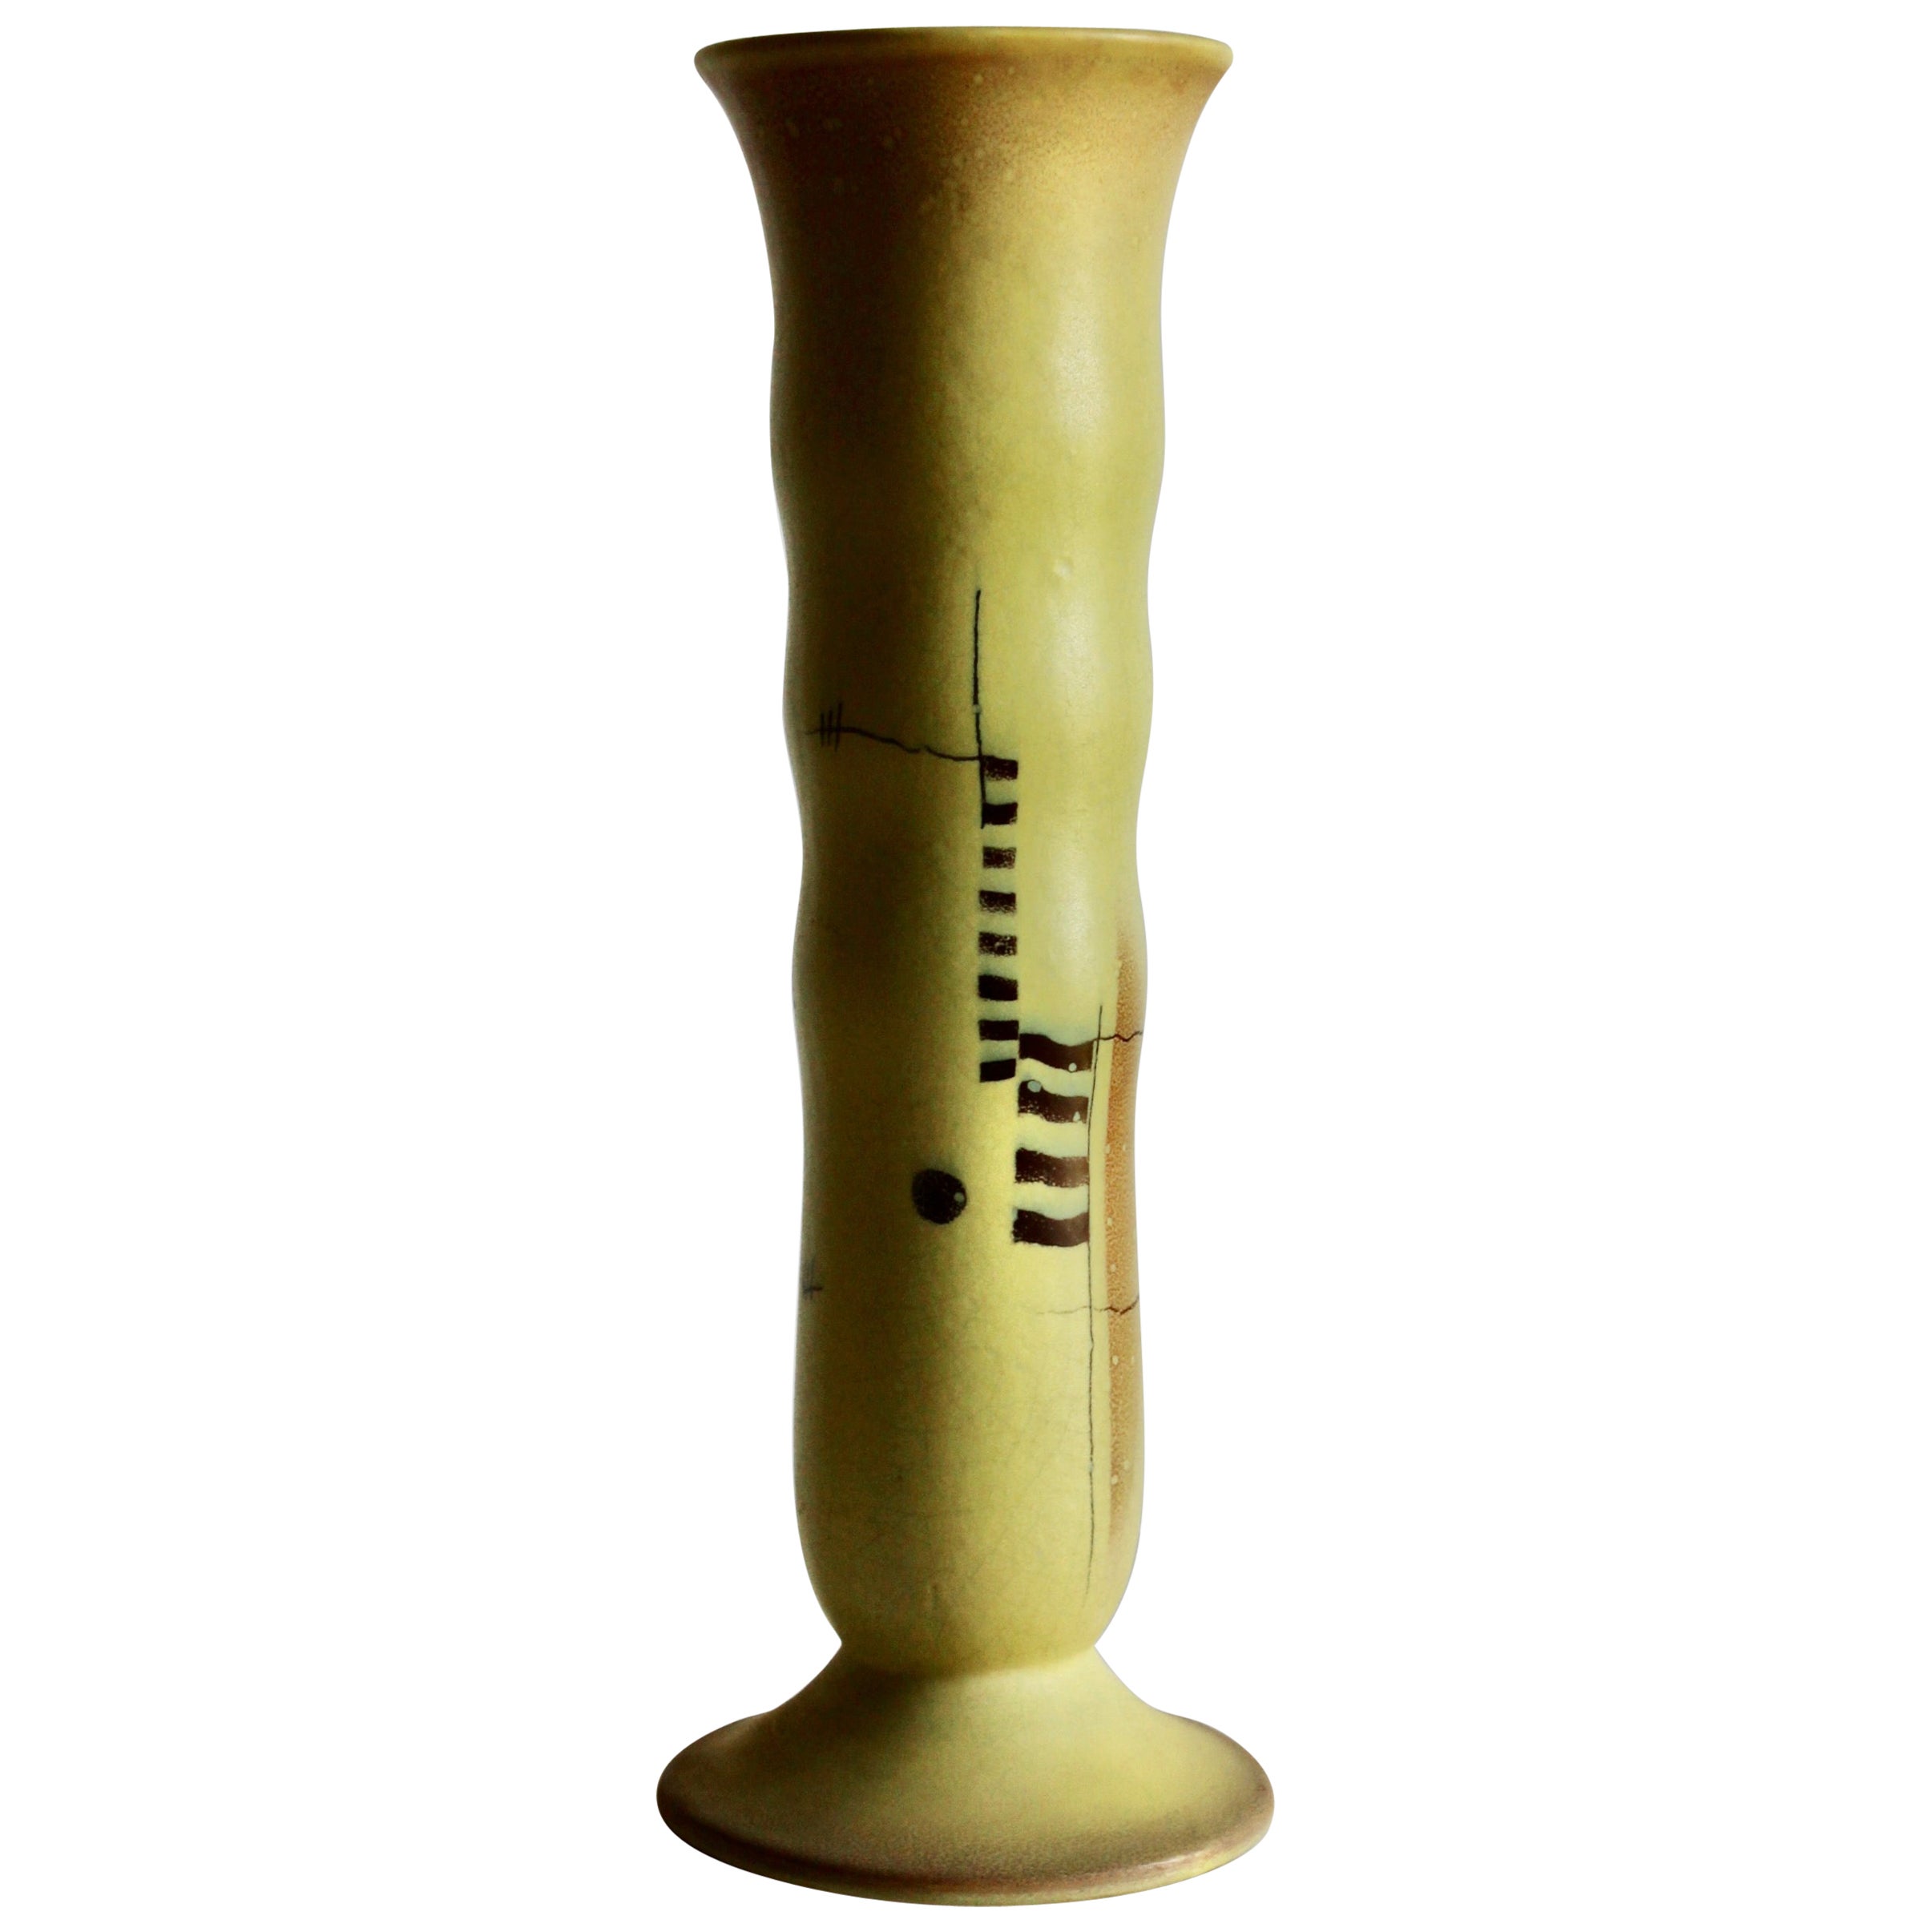 Bauhaus Period Tall Yellow Vase For Sale